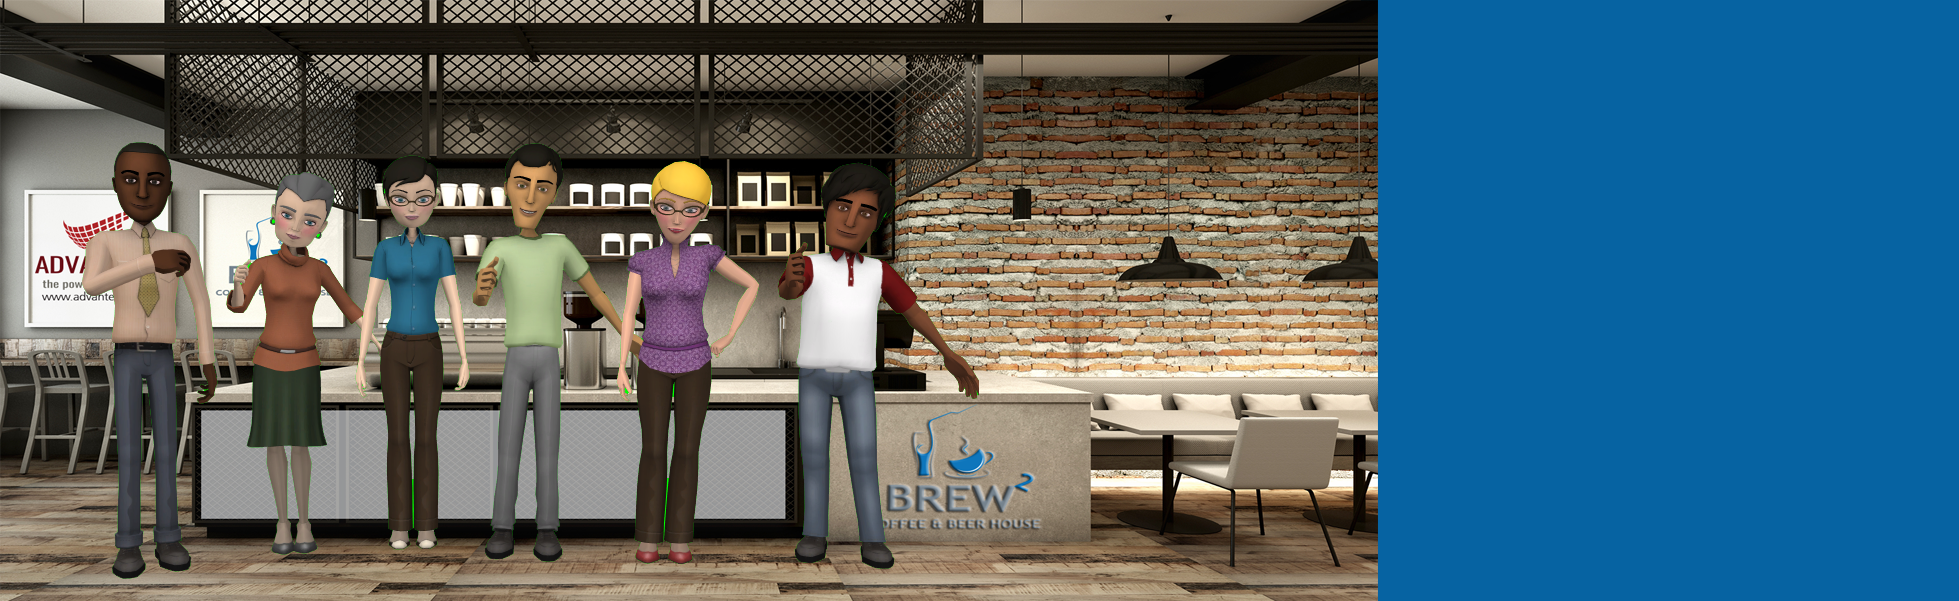 brew-2-landing-page-banner.png